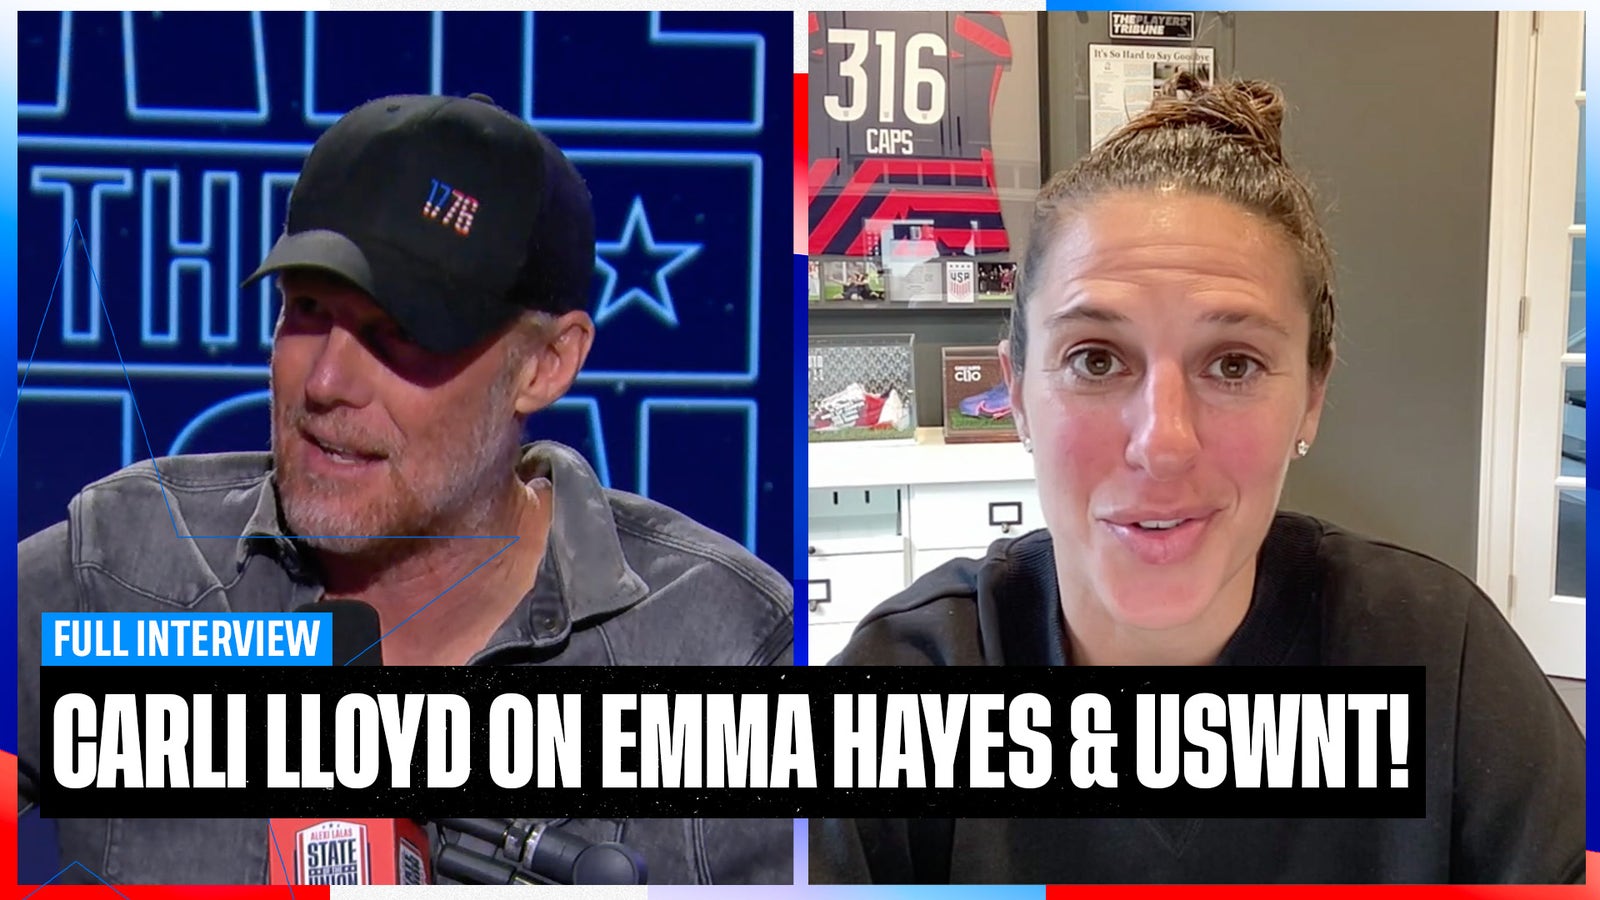 Carli Lloyd on Emma Hayes, Olympics roster and more